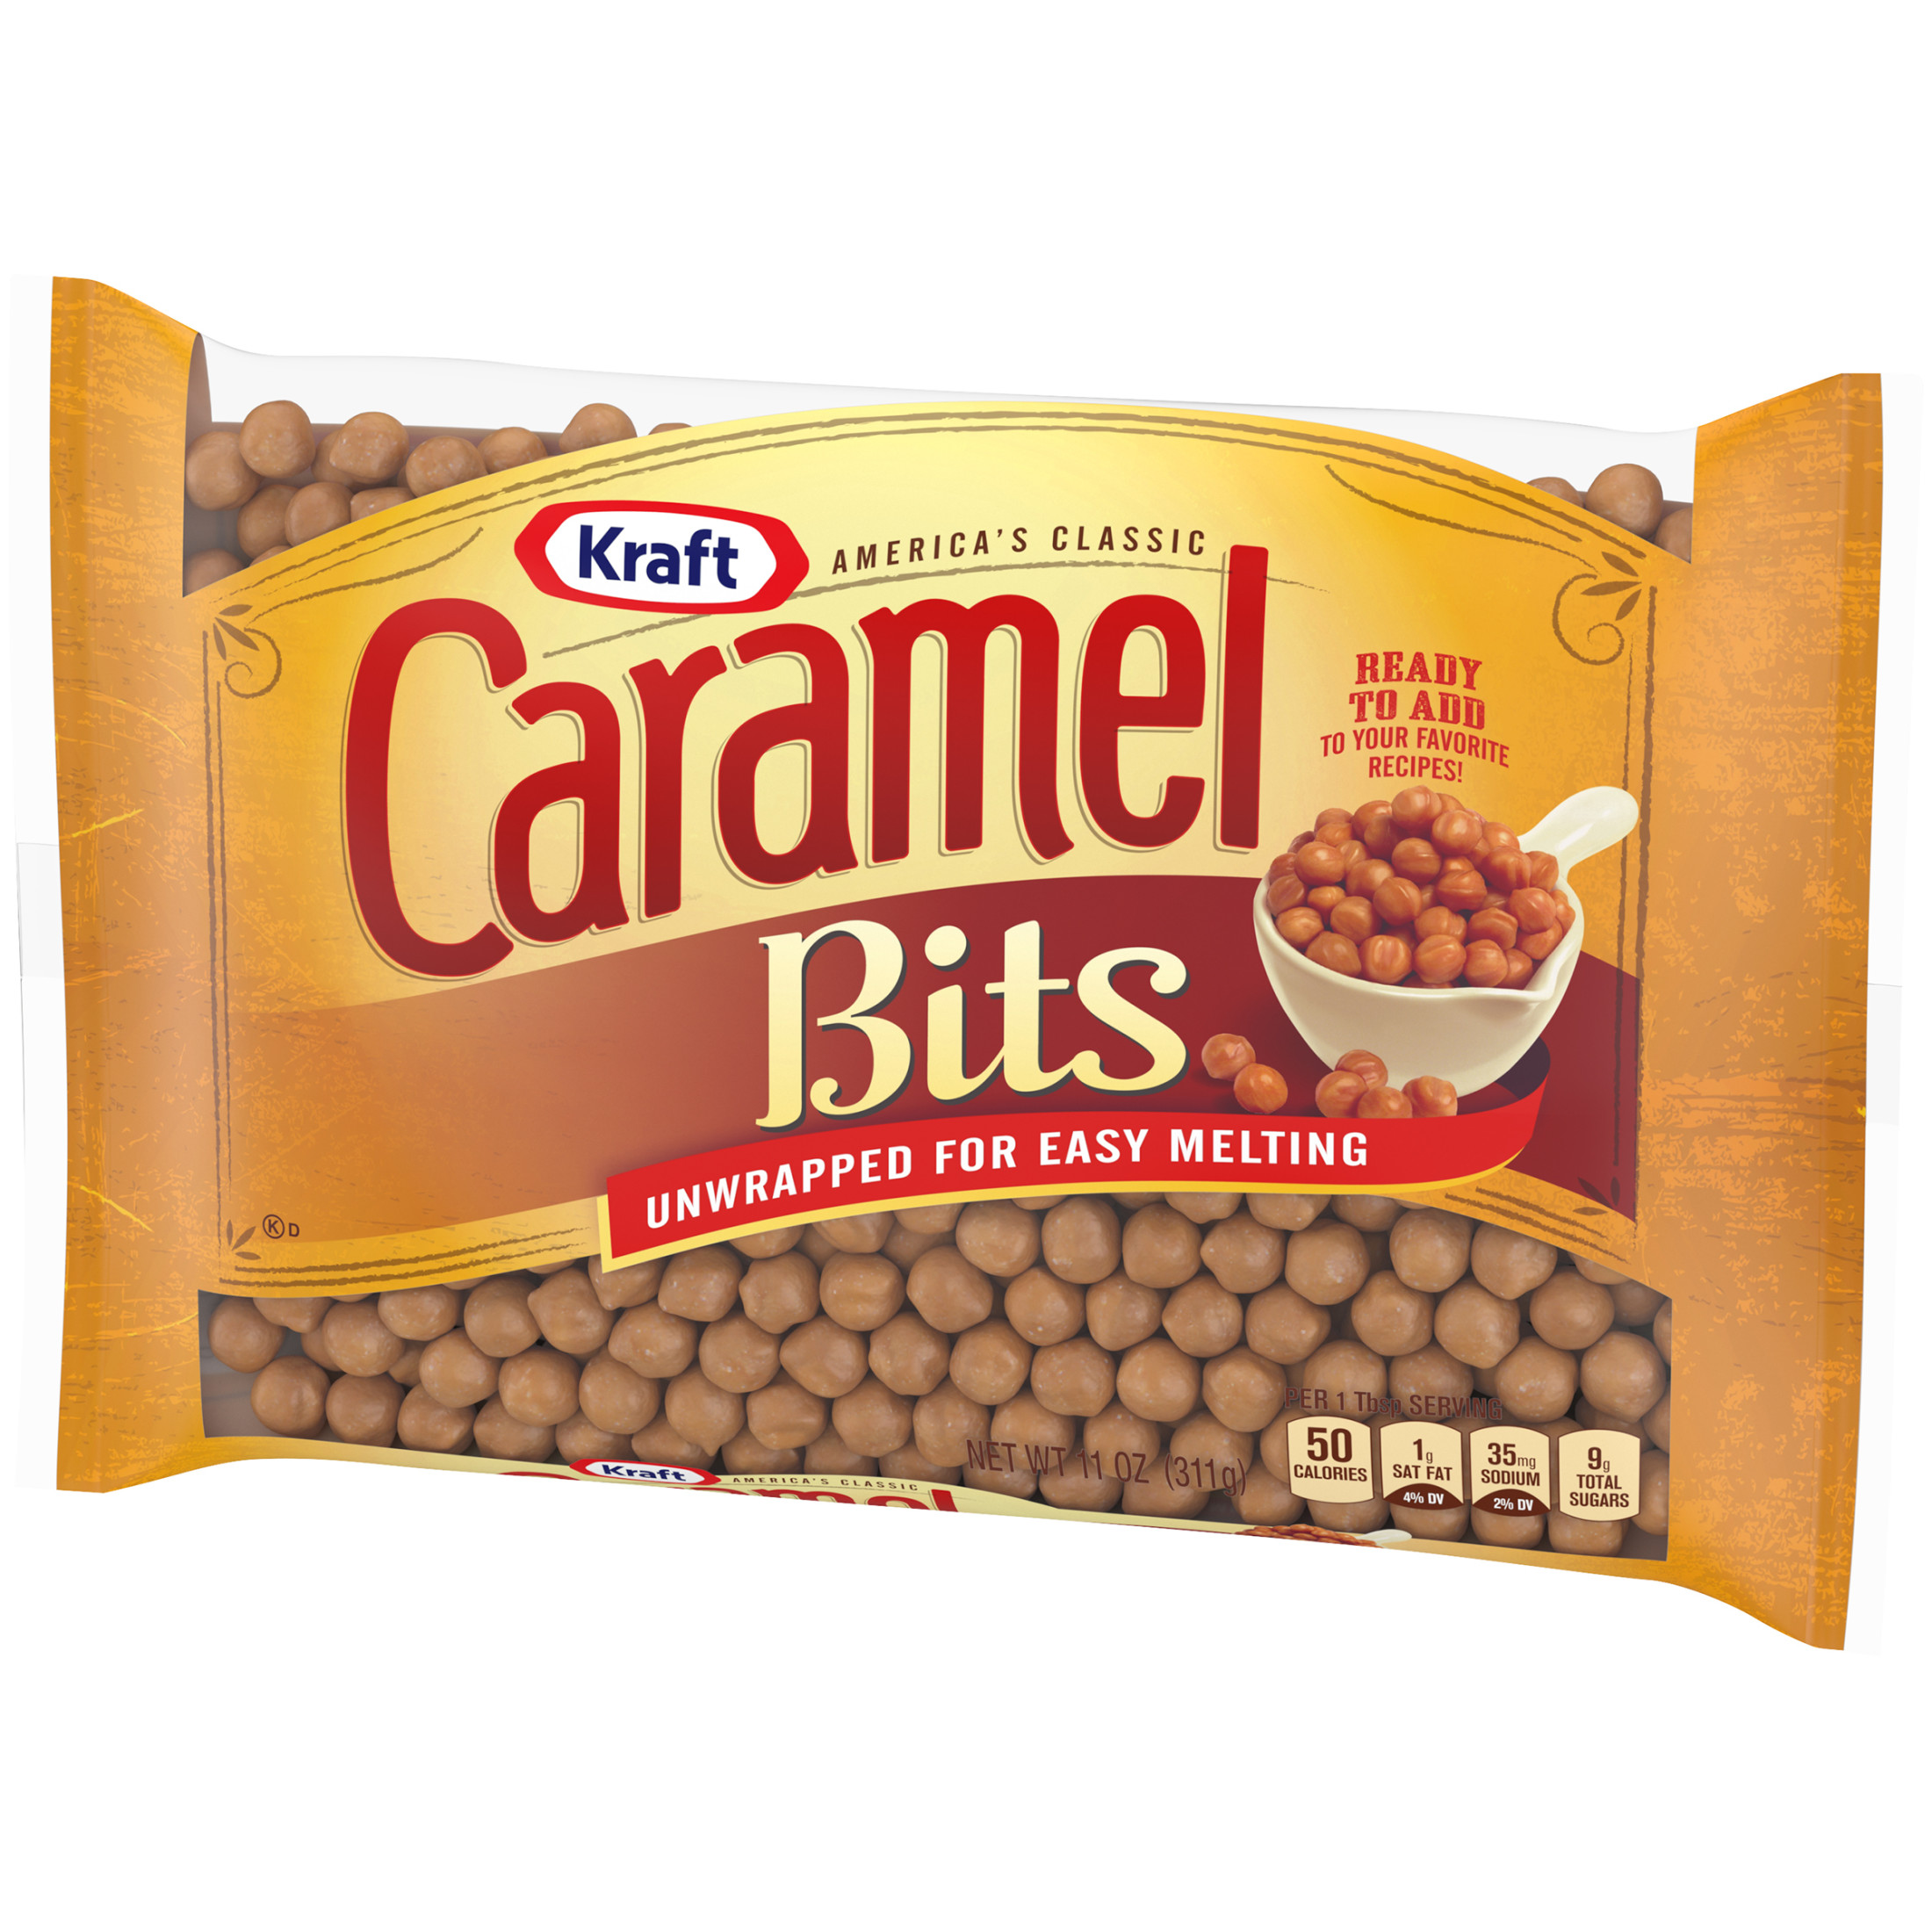 Kraft America's Classic Unwrapped Candy Caramel Bits for Easy Melting, 11 oz Bag - image 5 of 7